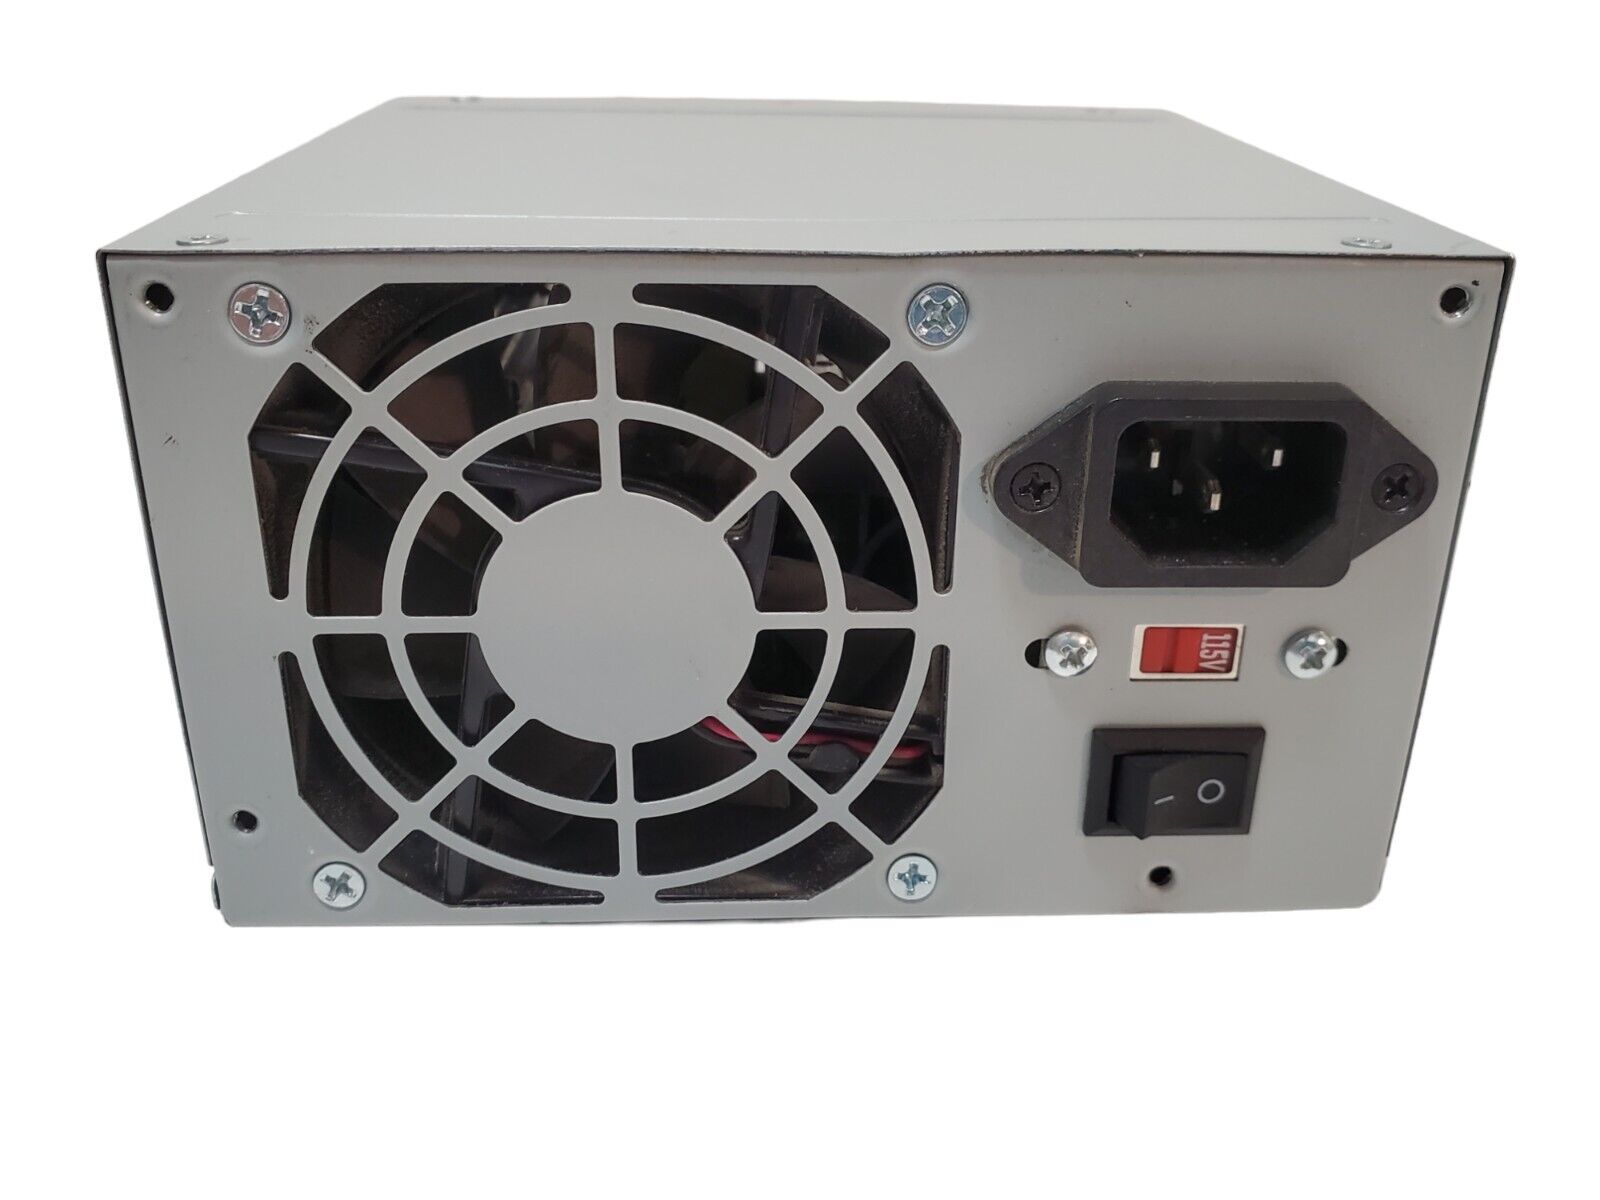 Coolmax 240-Pin 400 Power Supply with 1X80 Mm Low Noise Cooling Fan (I-400)